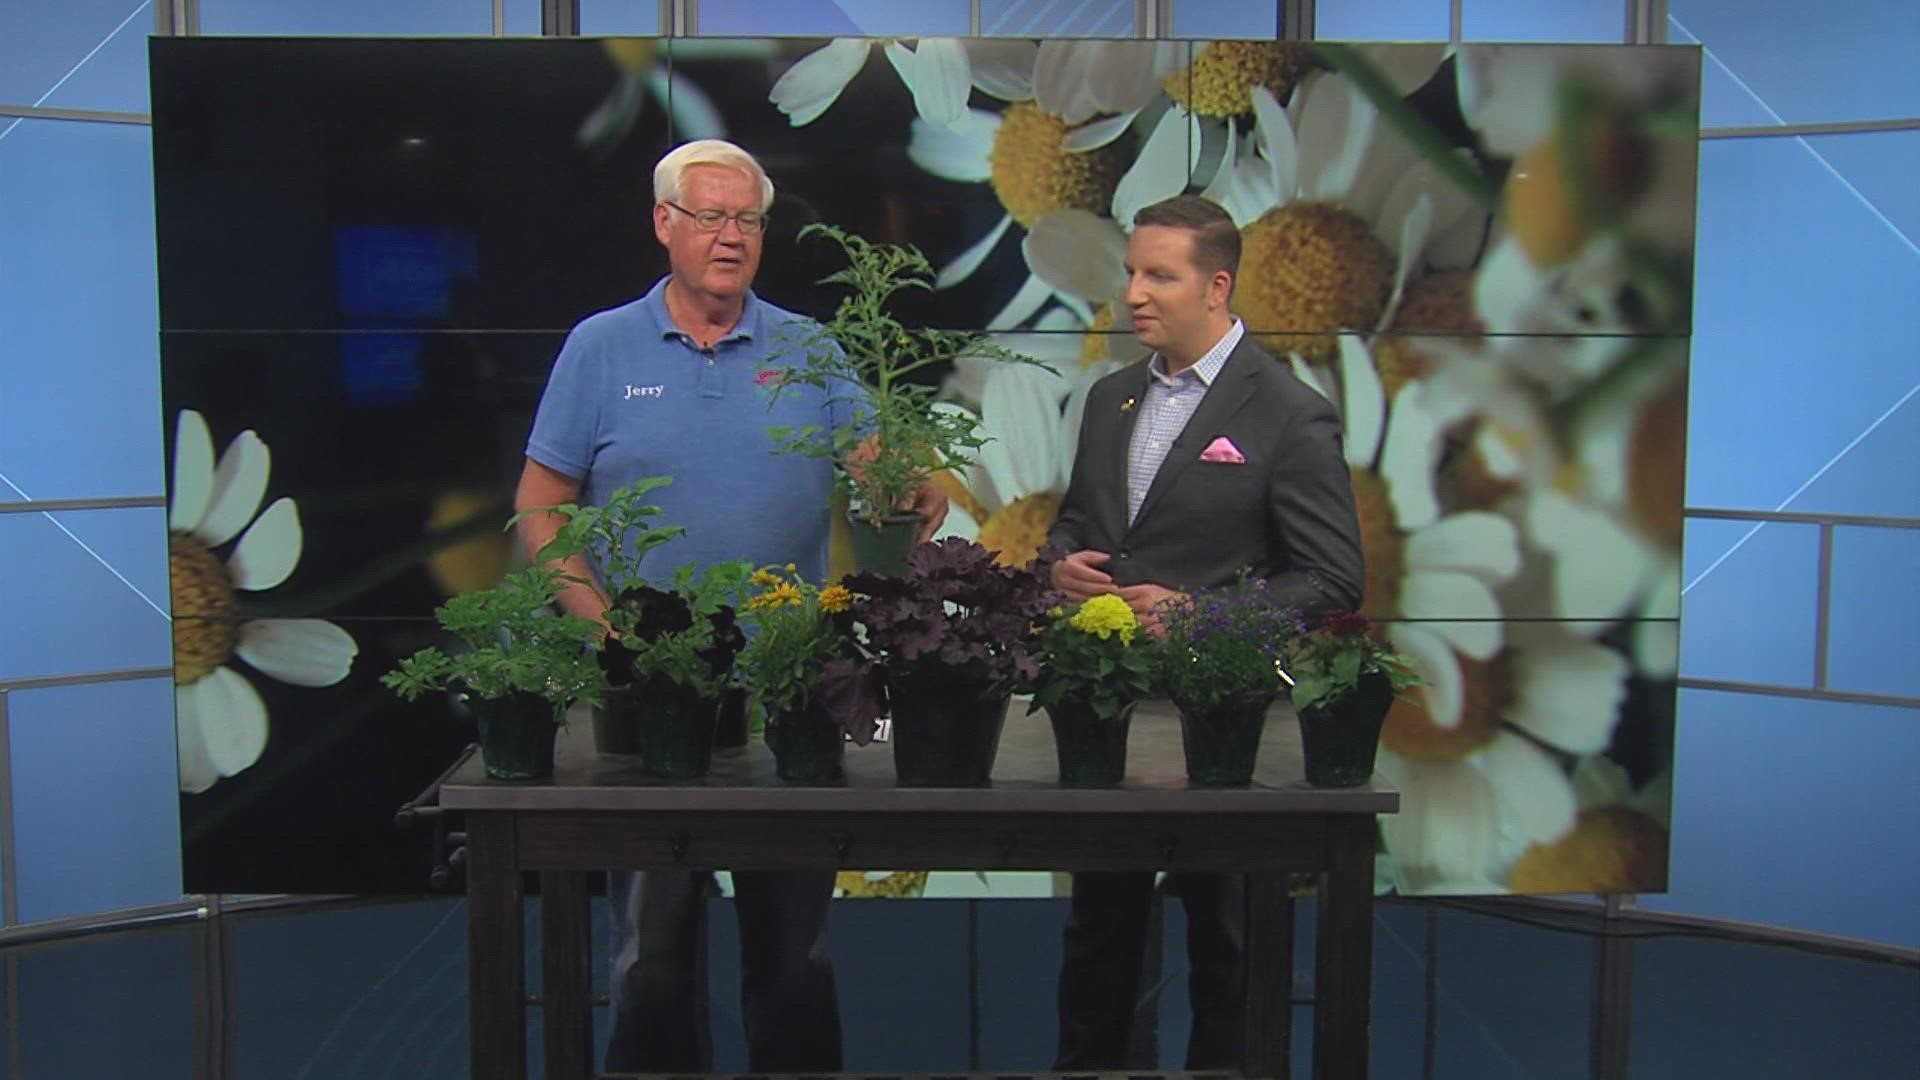 Jerry Holub with Holub Greenhouses shares tips for tomato plants, mint and more.